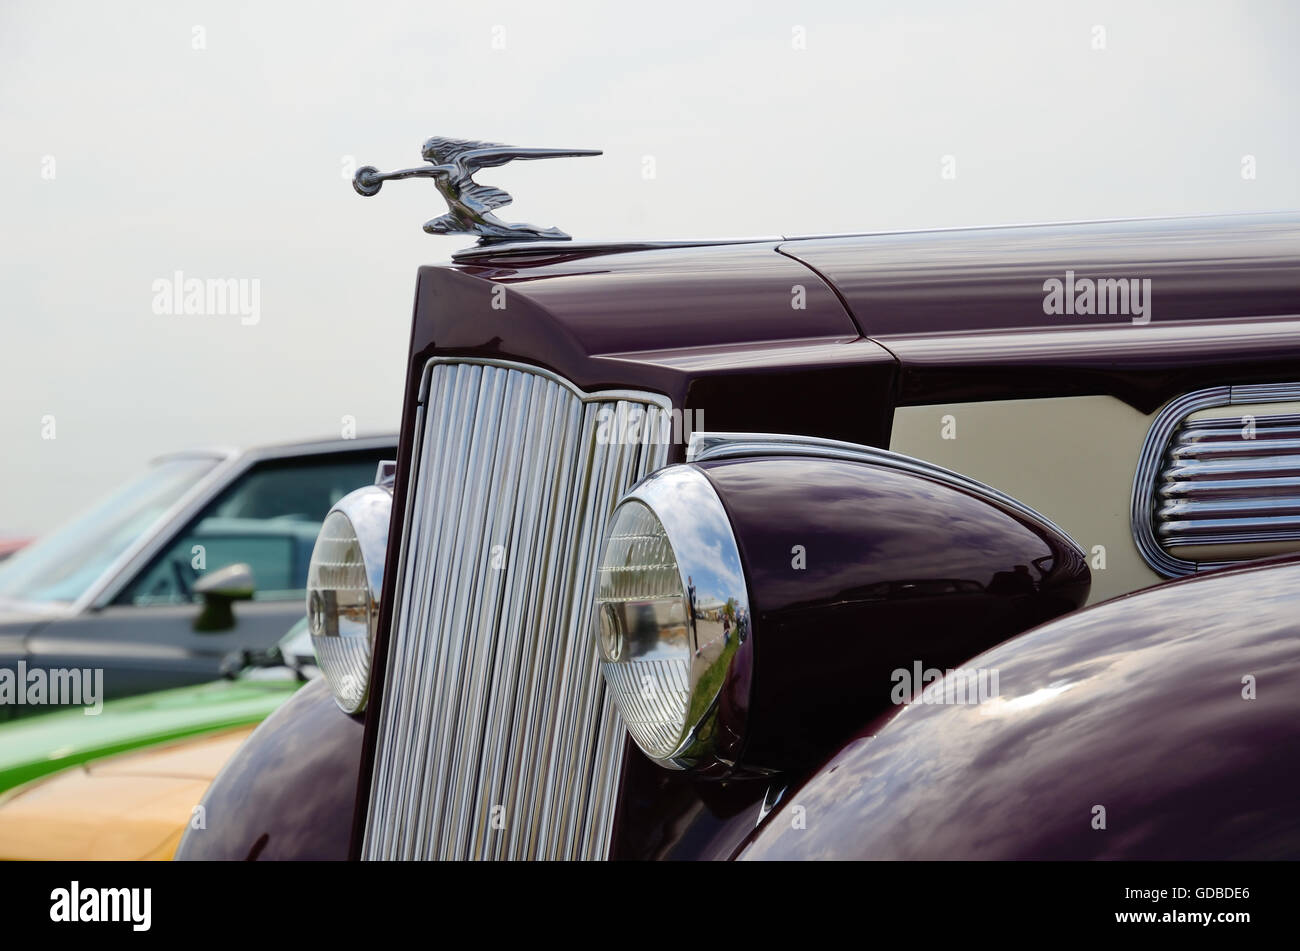 Front part of the vintage car with a hood ornament Stock Photo